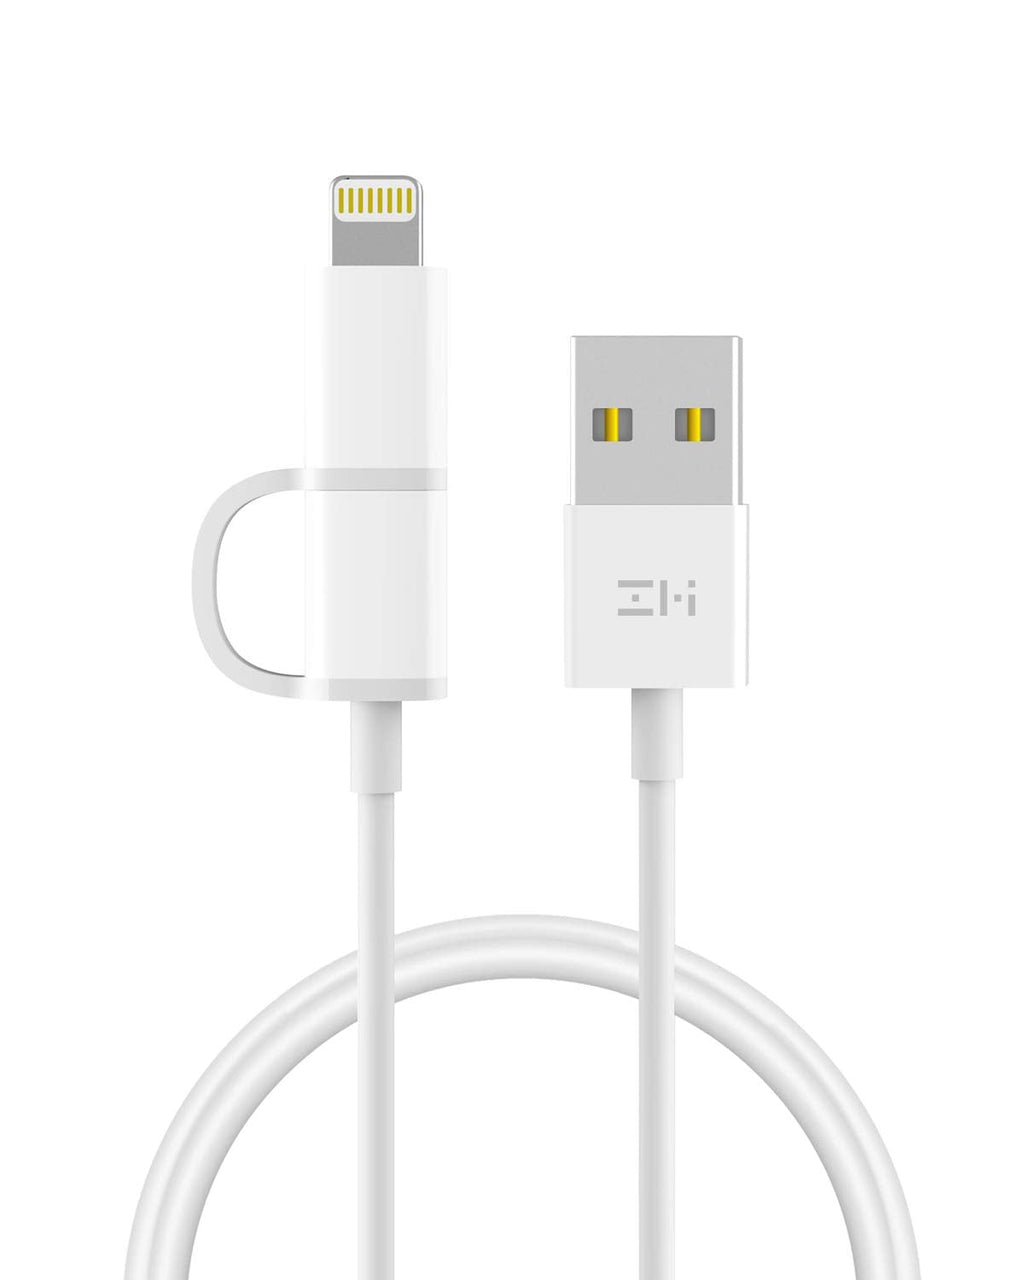  [AUSTRALIA] - [3.3ft] ZMI 2-in-1 Certified MFi and Micro-USB Combo Cable for iOS and Android,1 m, Charging and Data Sync for iPhone, iPad, iPod, and More